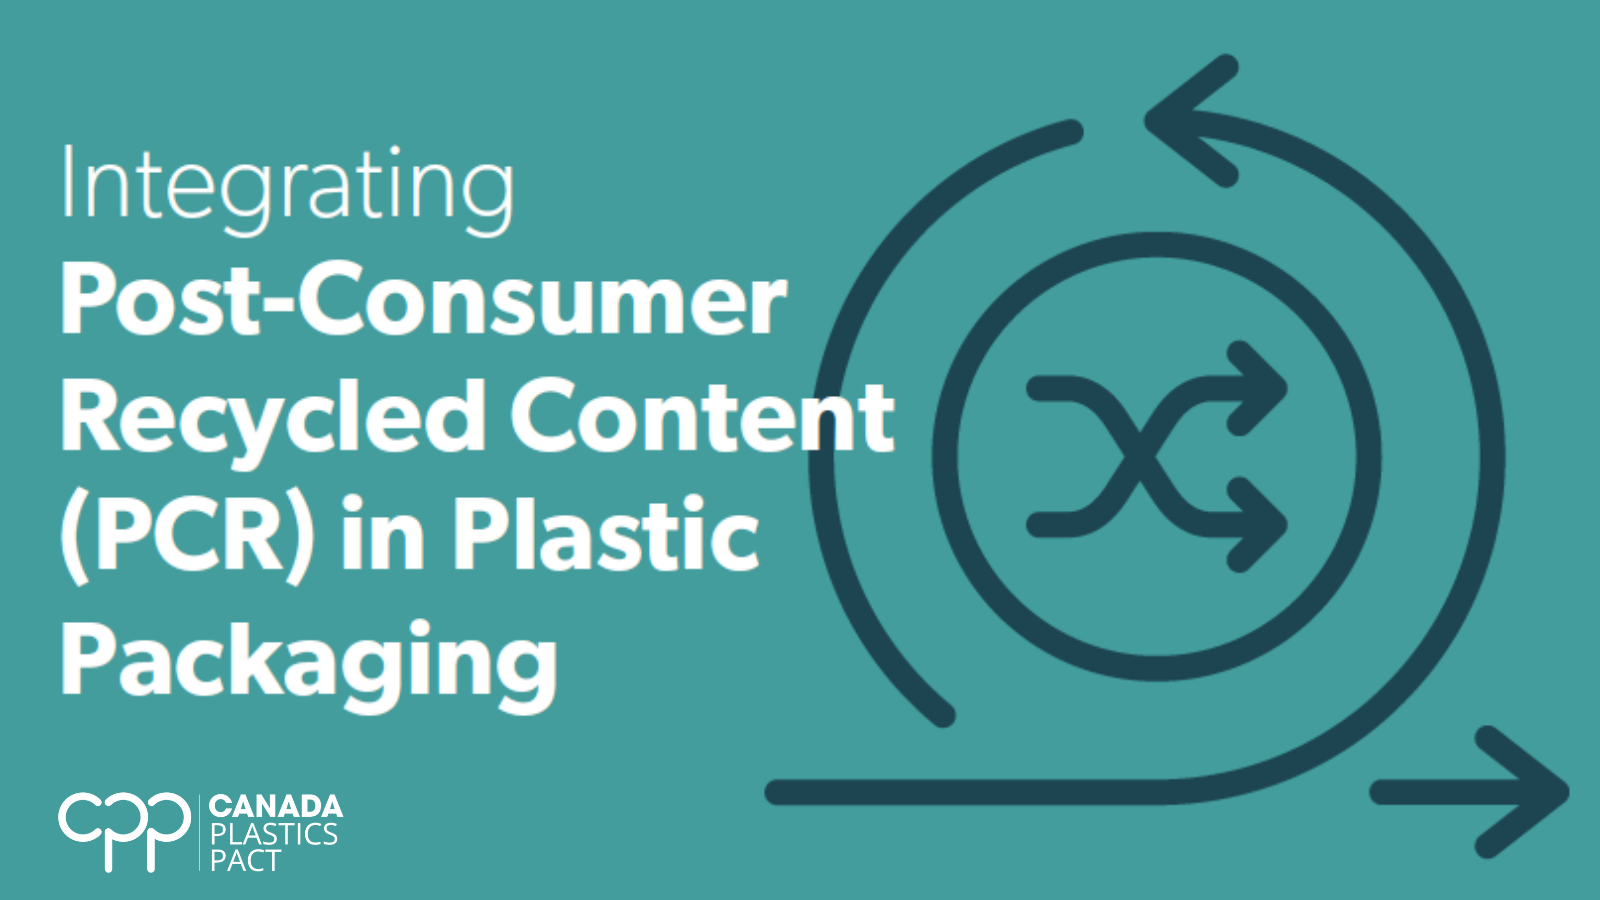 Integrating Post-Consumer Recycled Content (PCR) in Plastic Packaging